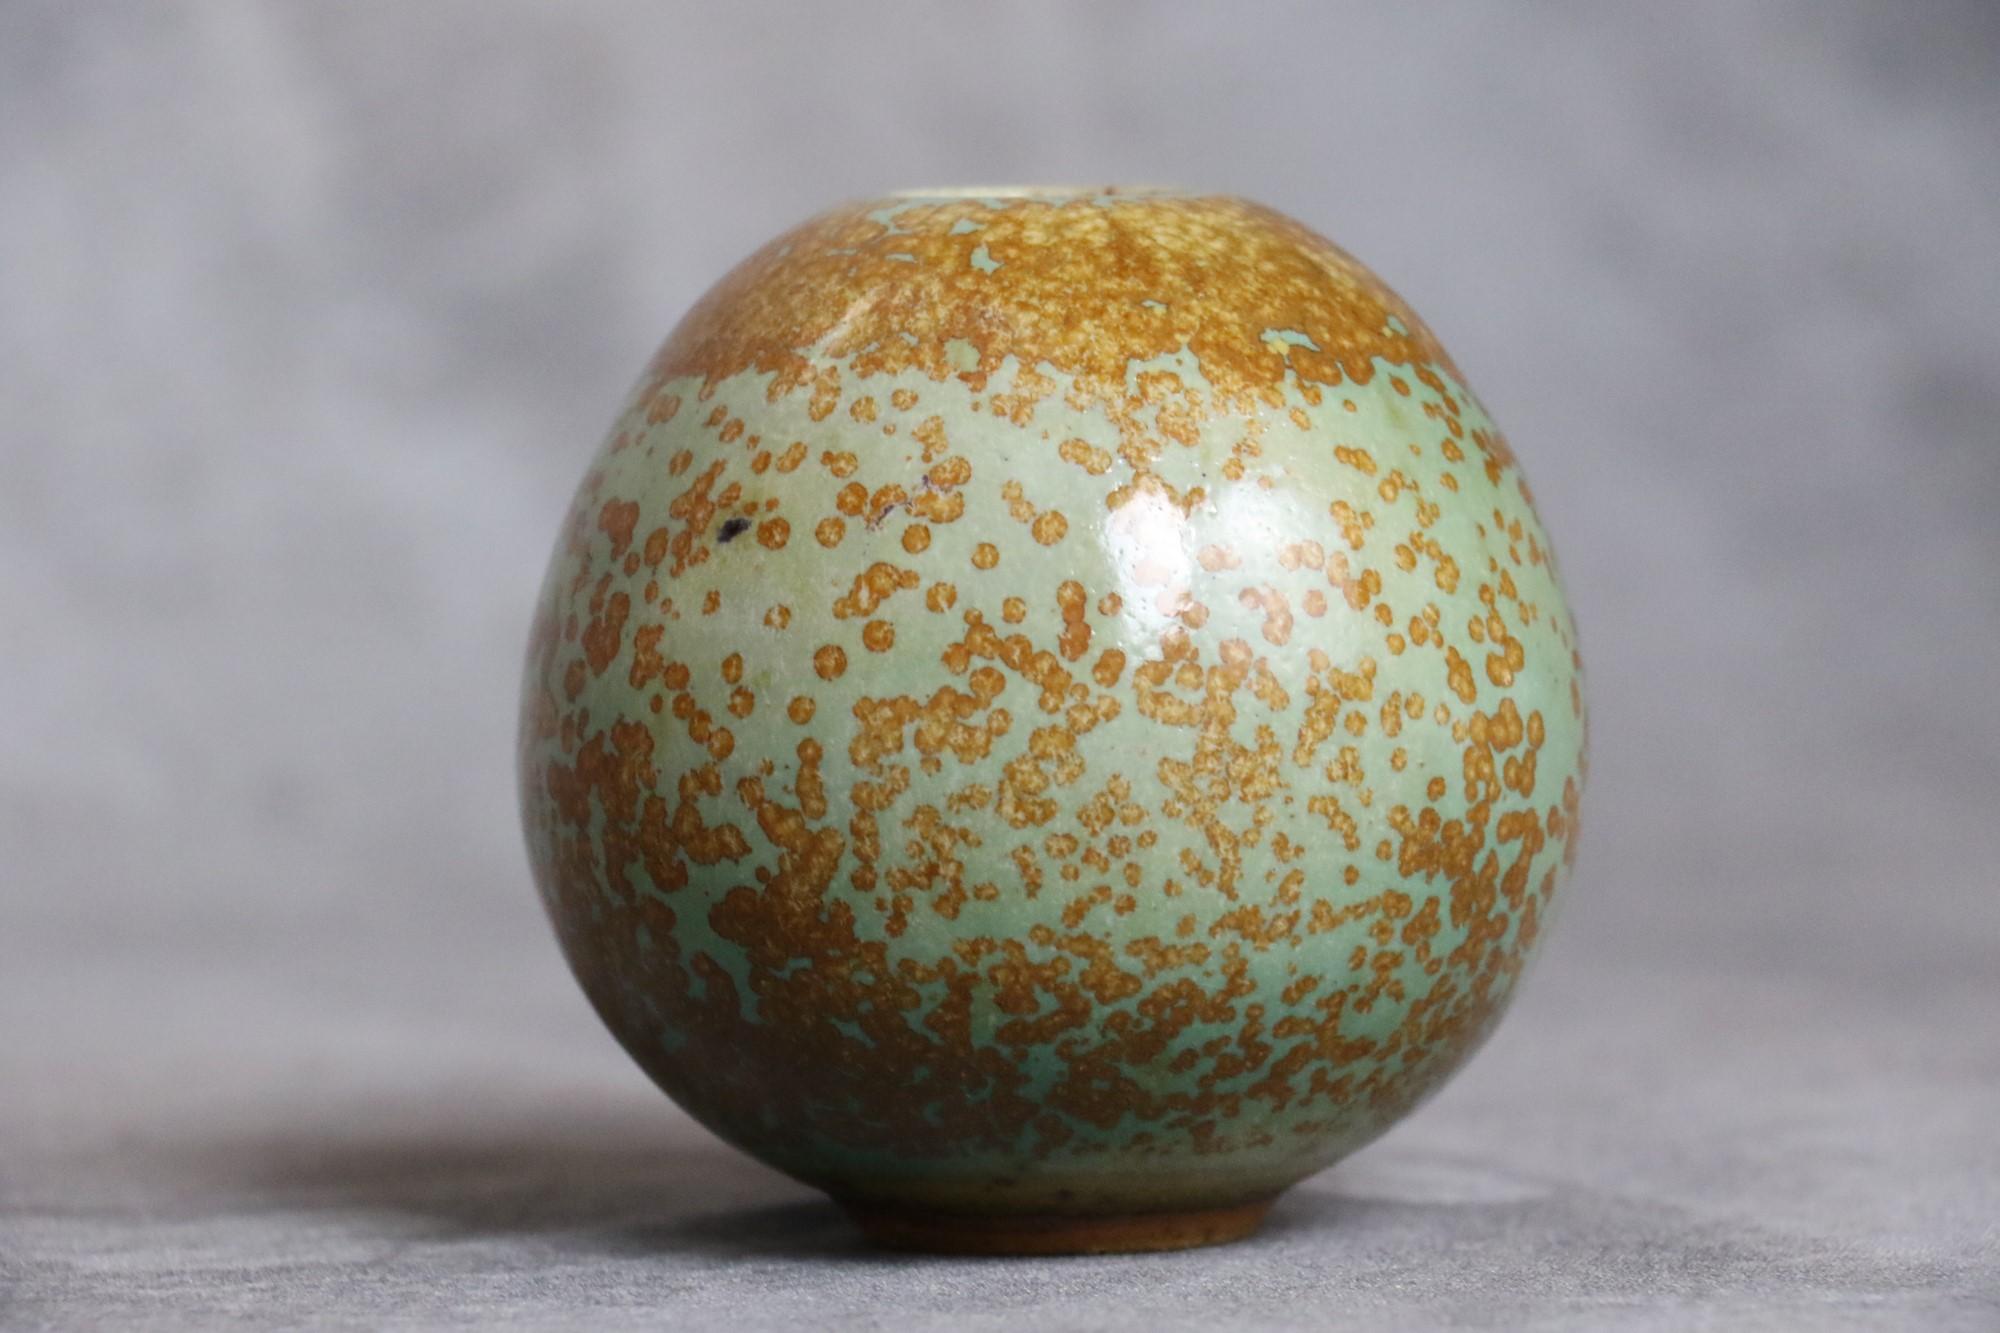 Mid-Century Modern French Ceramic Ball Vase with Nucleations by Monique Cavallini - circa 2000 For Sale